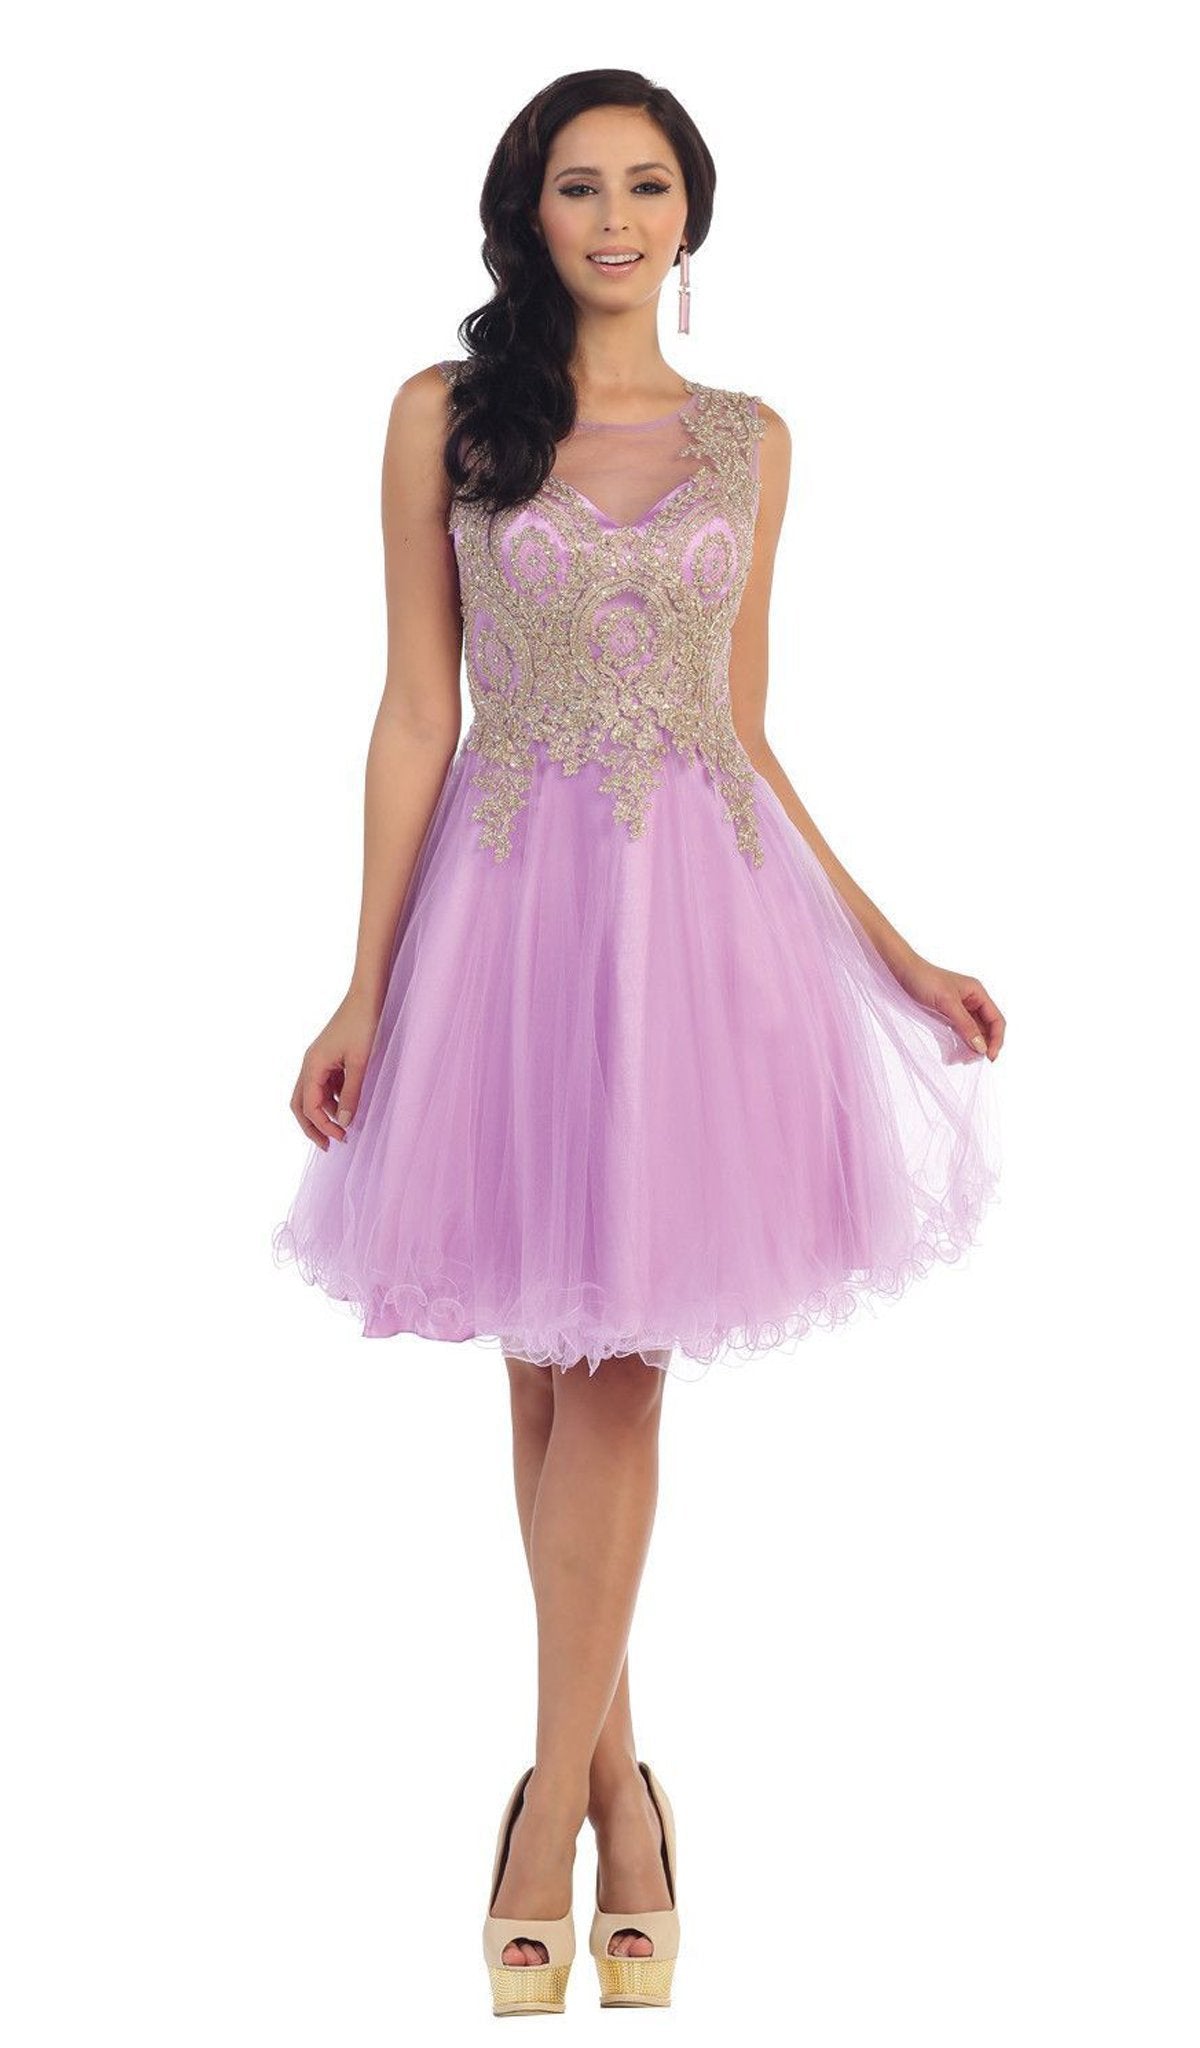 May Queen - Sleeveless Ornate Lace Illusion Cocktail Dress Special Occasion Dress 2 / Lilac